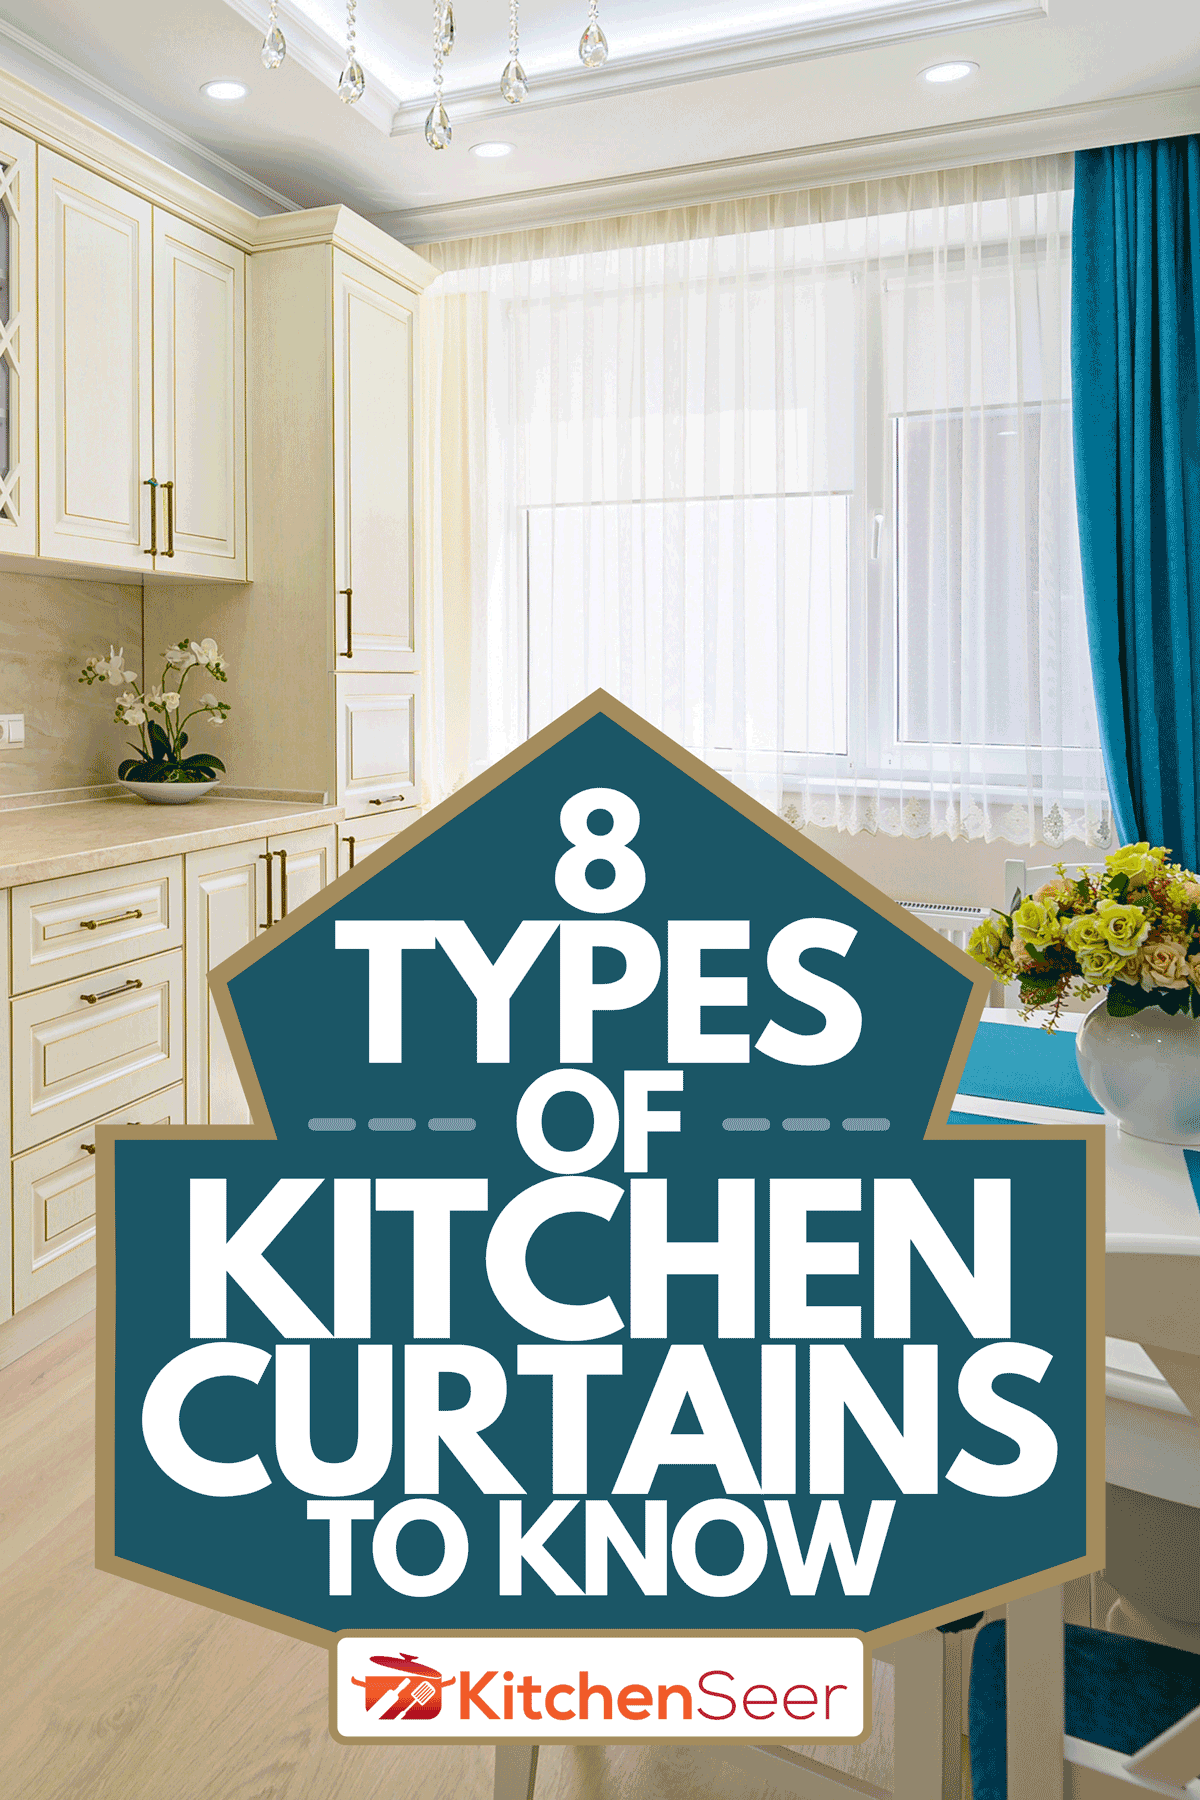 Contemporary classic kitchen interior designed in provence style, 8 Types Of Kitchen Curtains To Know